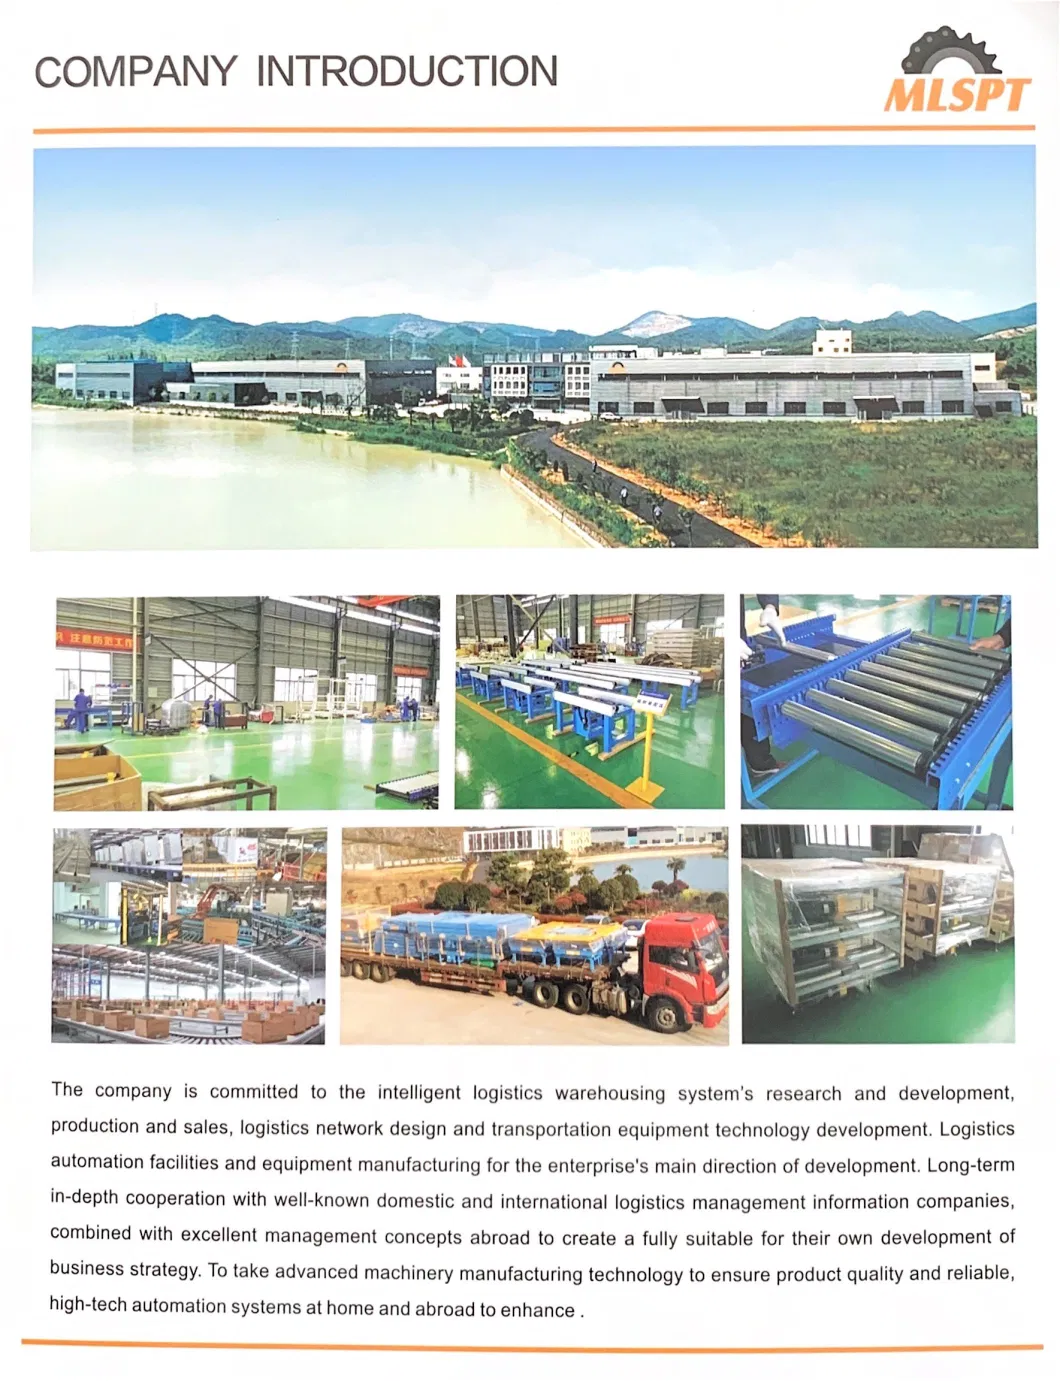 China Products/Suppliers. 89-217mm Diameter Tube and Conveyor Roller